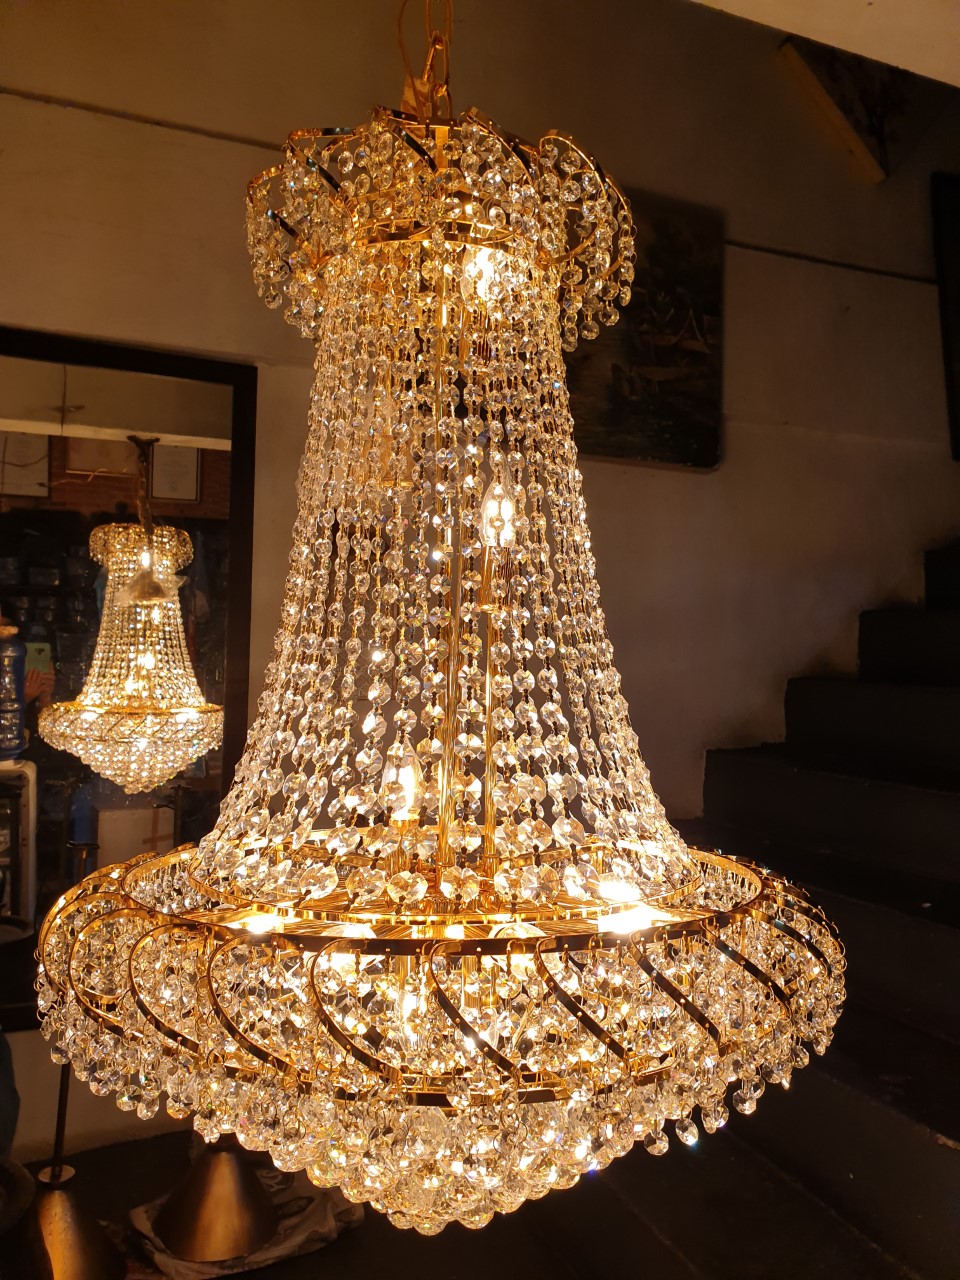 Crystal Chandelier Item Code CDLTP018 size wide 600 mm. H 900 mm.not include chain.